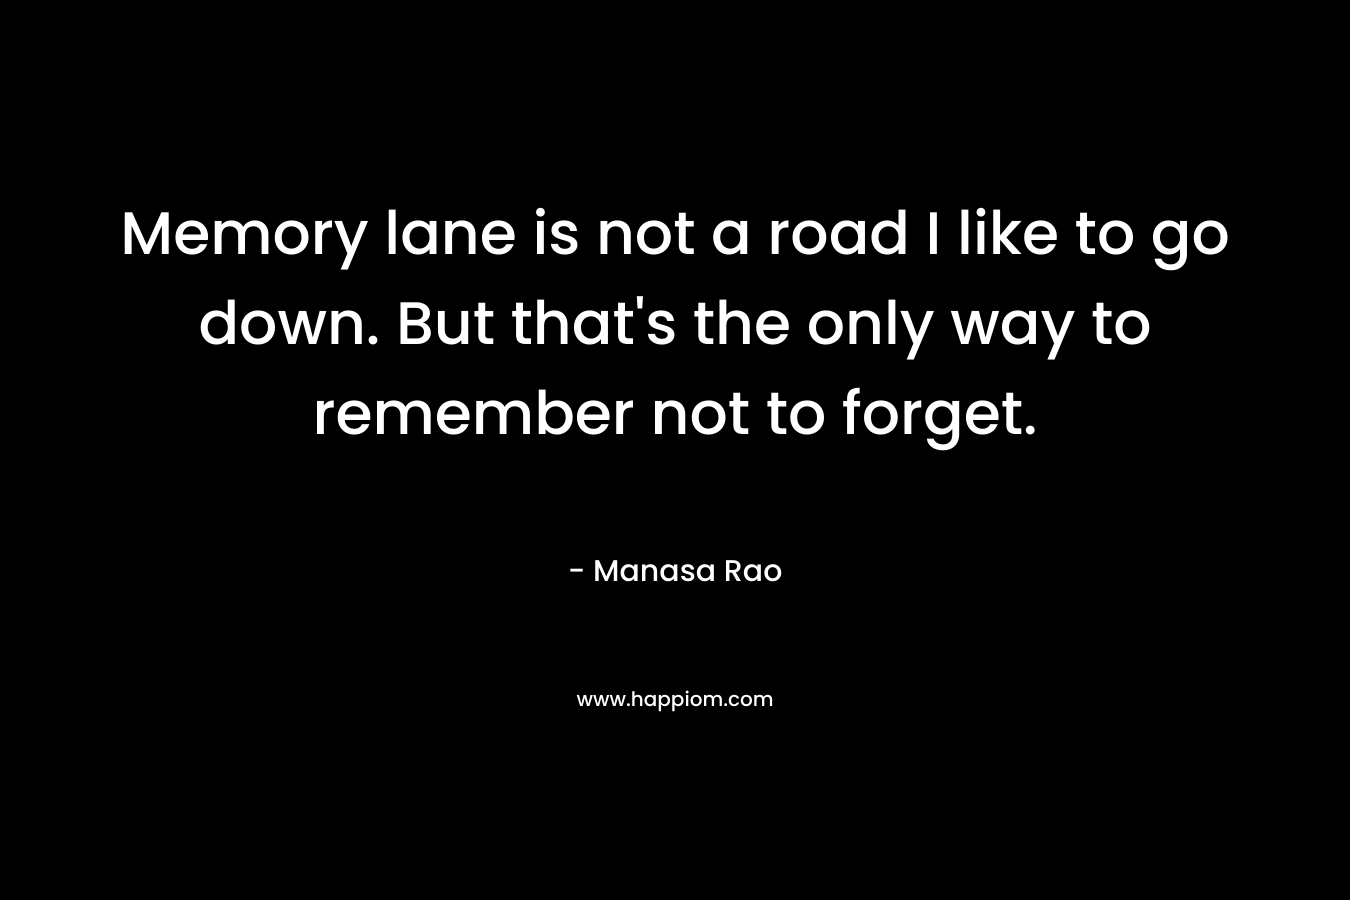 Memory lane is not a road I like to go down. But that's the only way to remember not to forget.